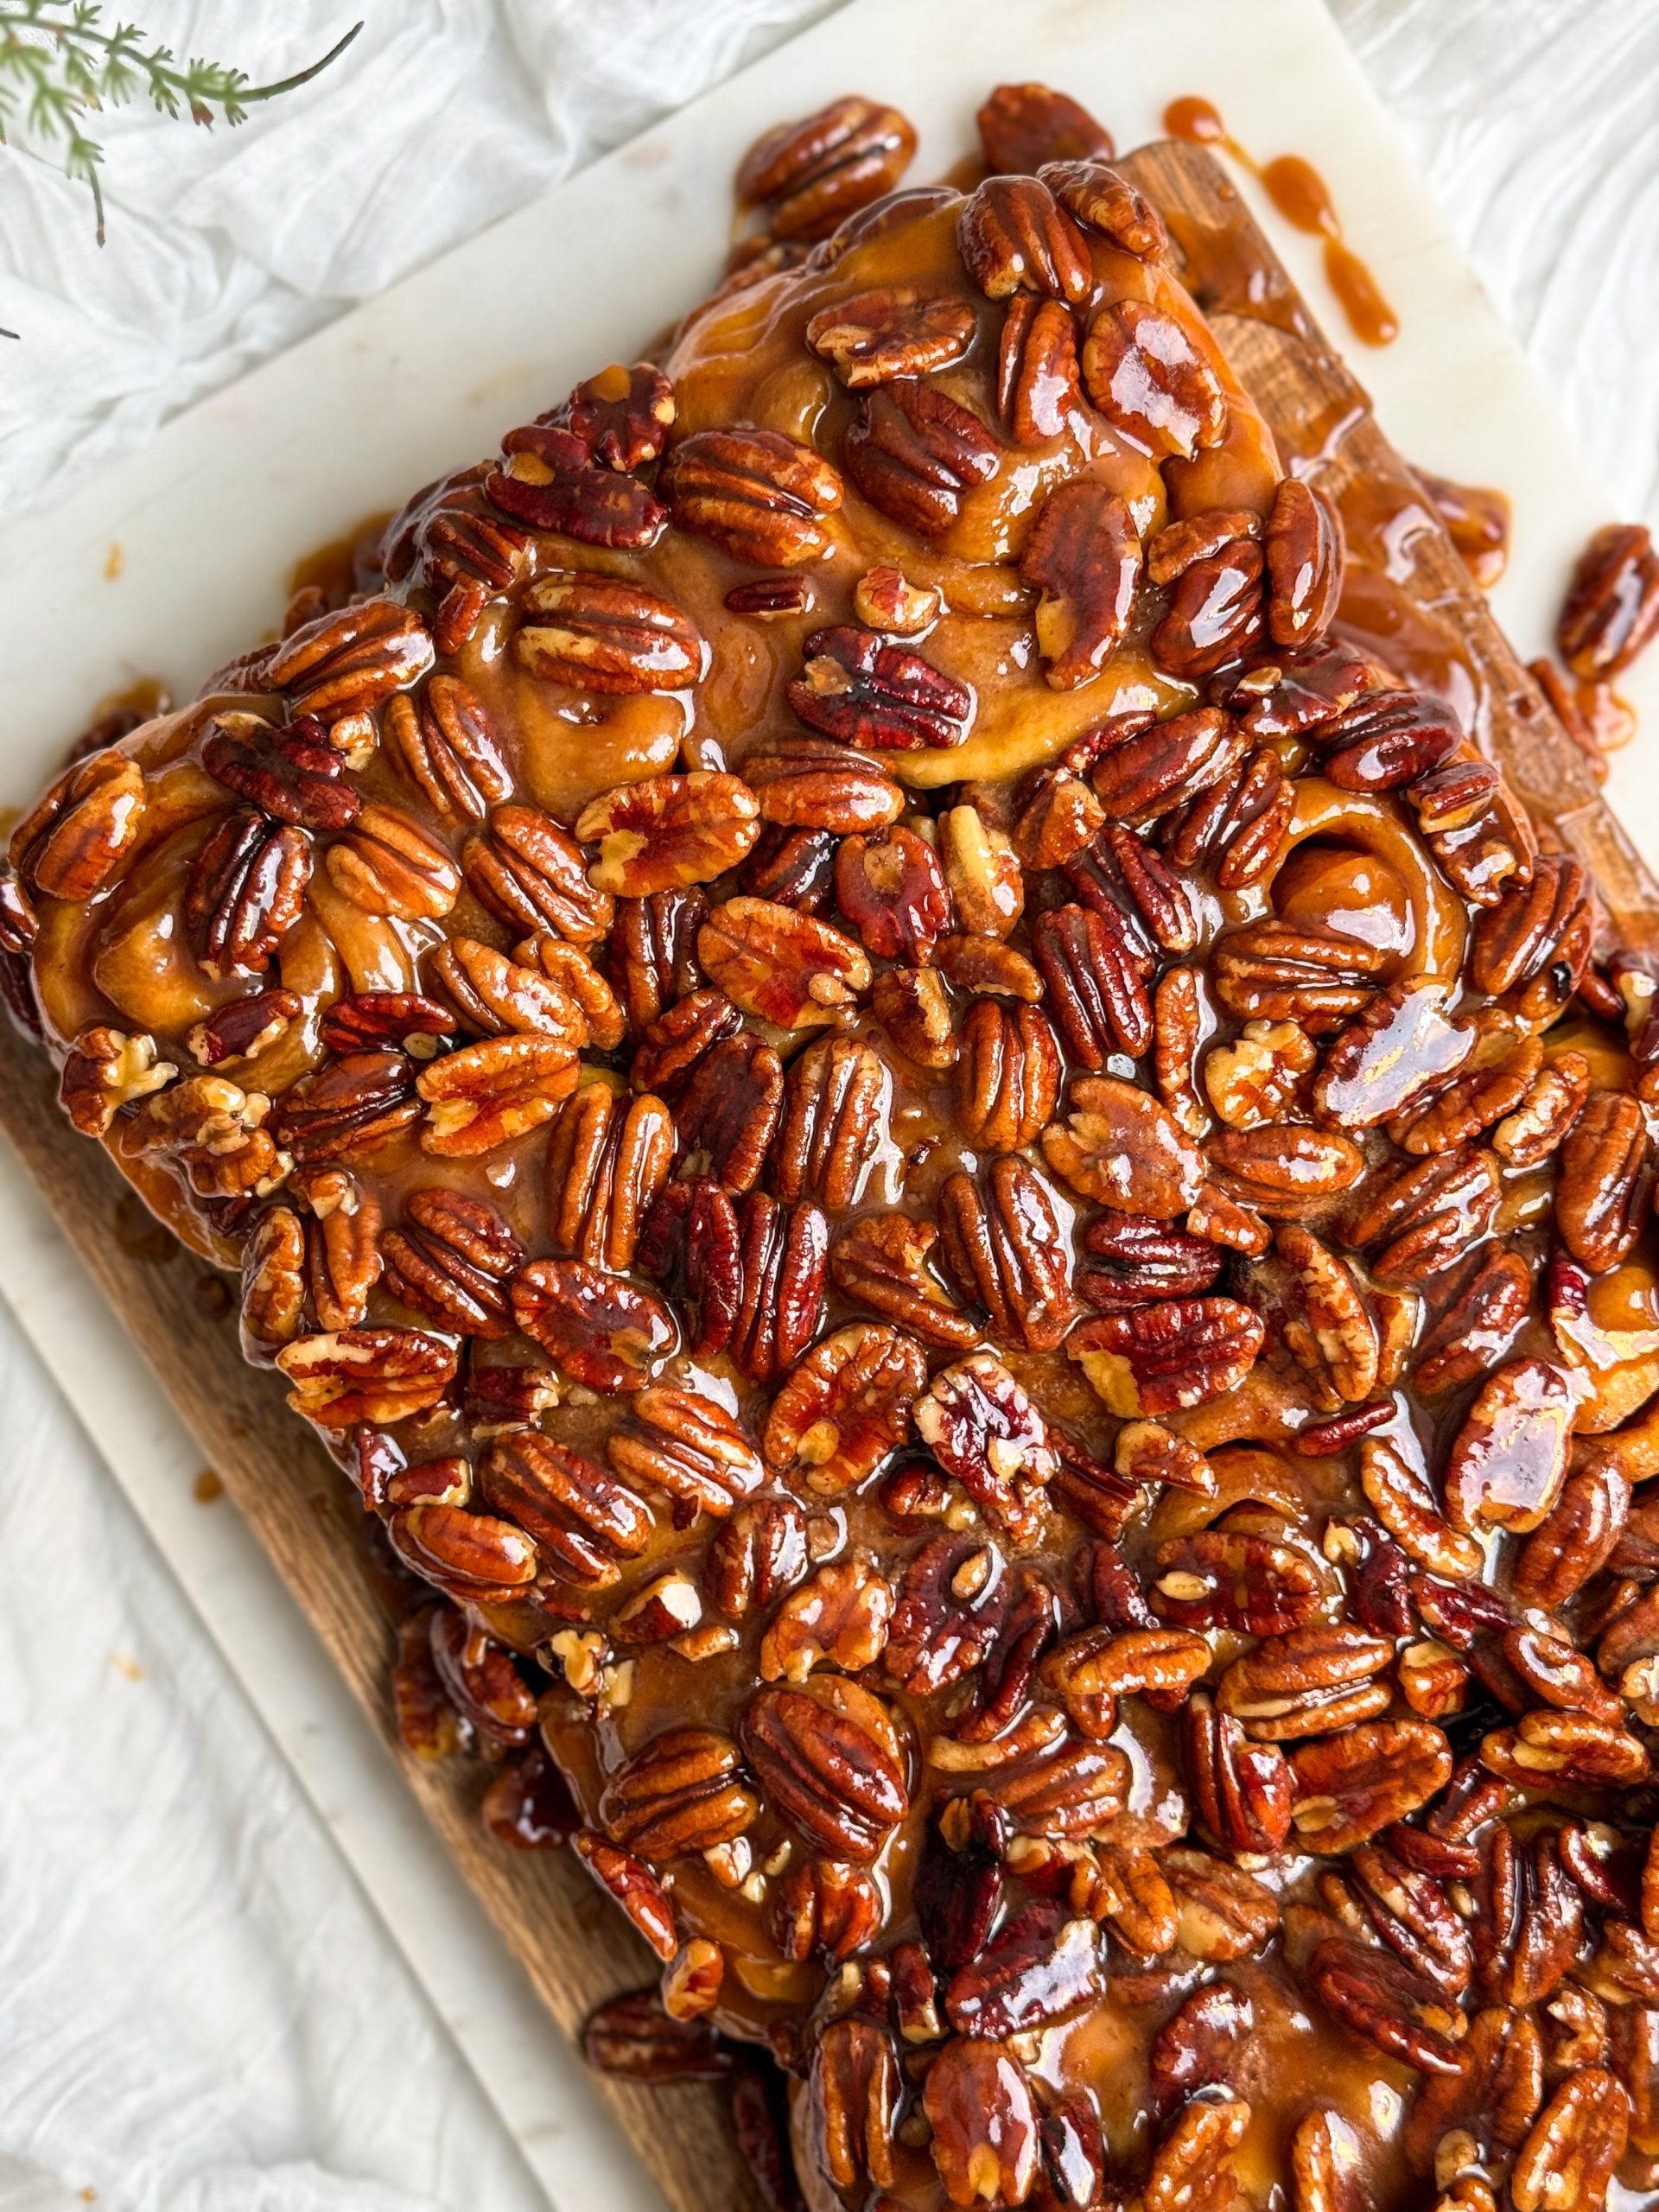 12 sticky pecan cinnamon buns with a caramel pecan topping on a wooden cutting board. they look soft and fluffy with a beautiful golden nutty topping. close up picture on the top